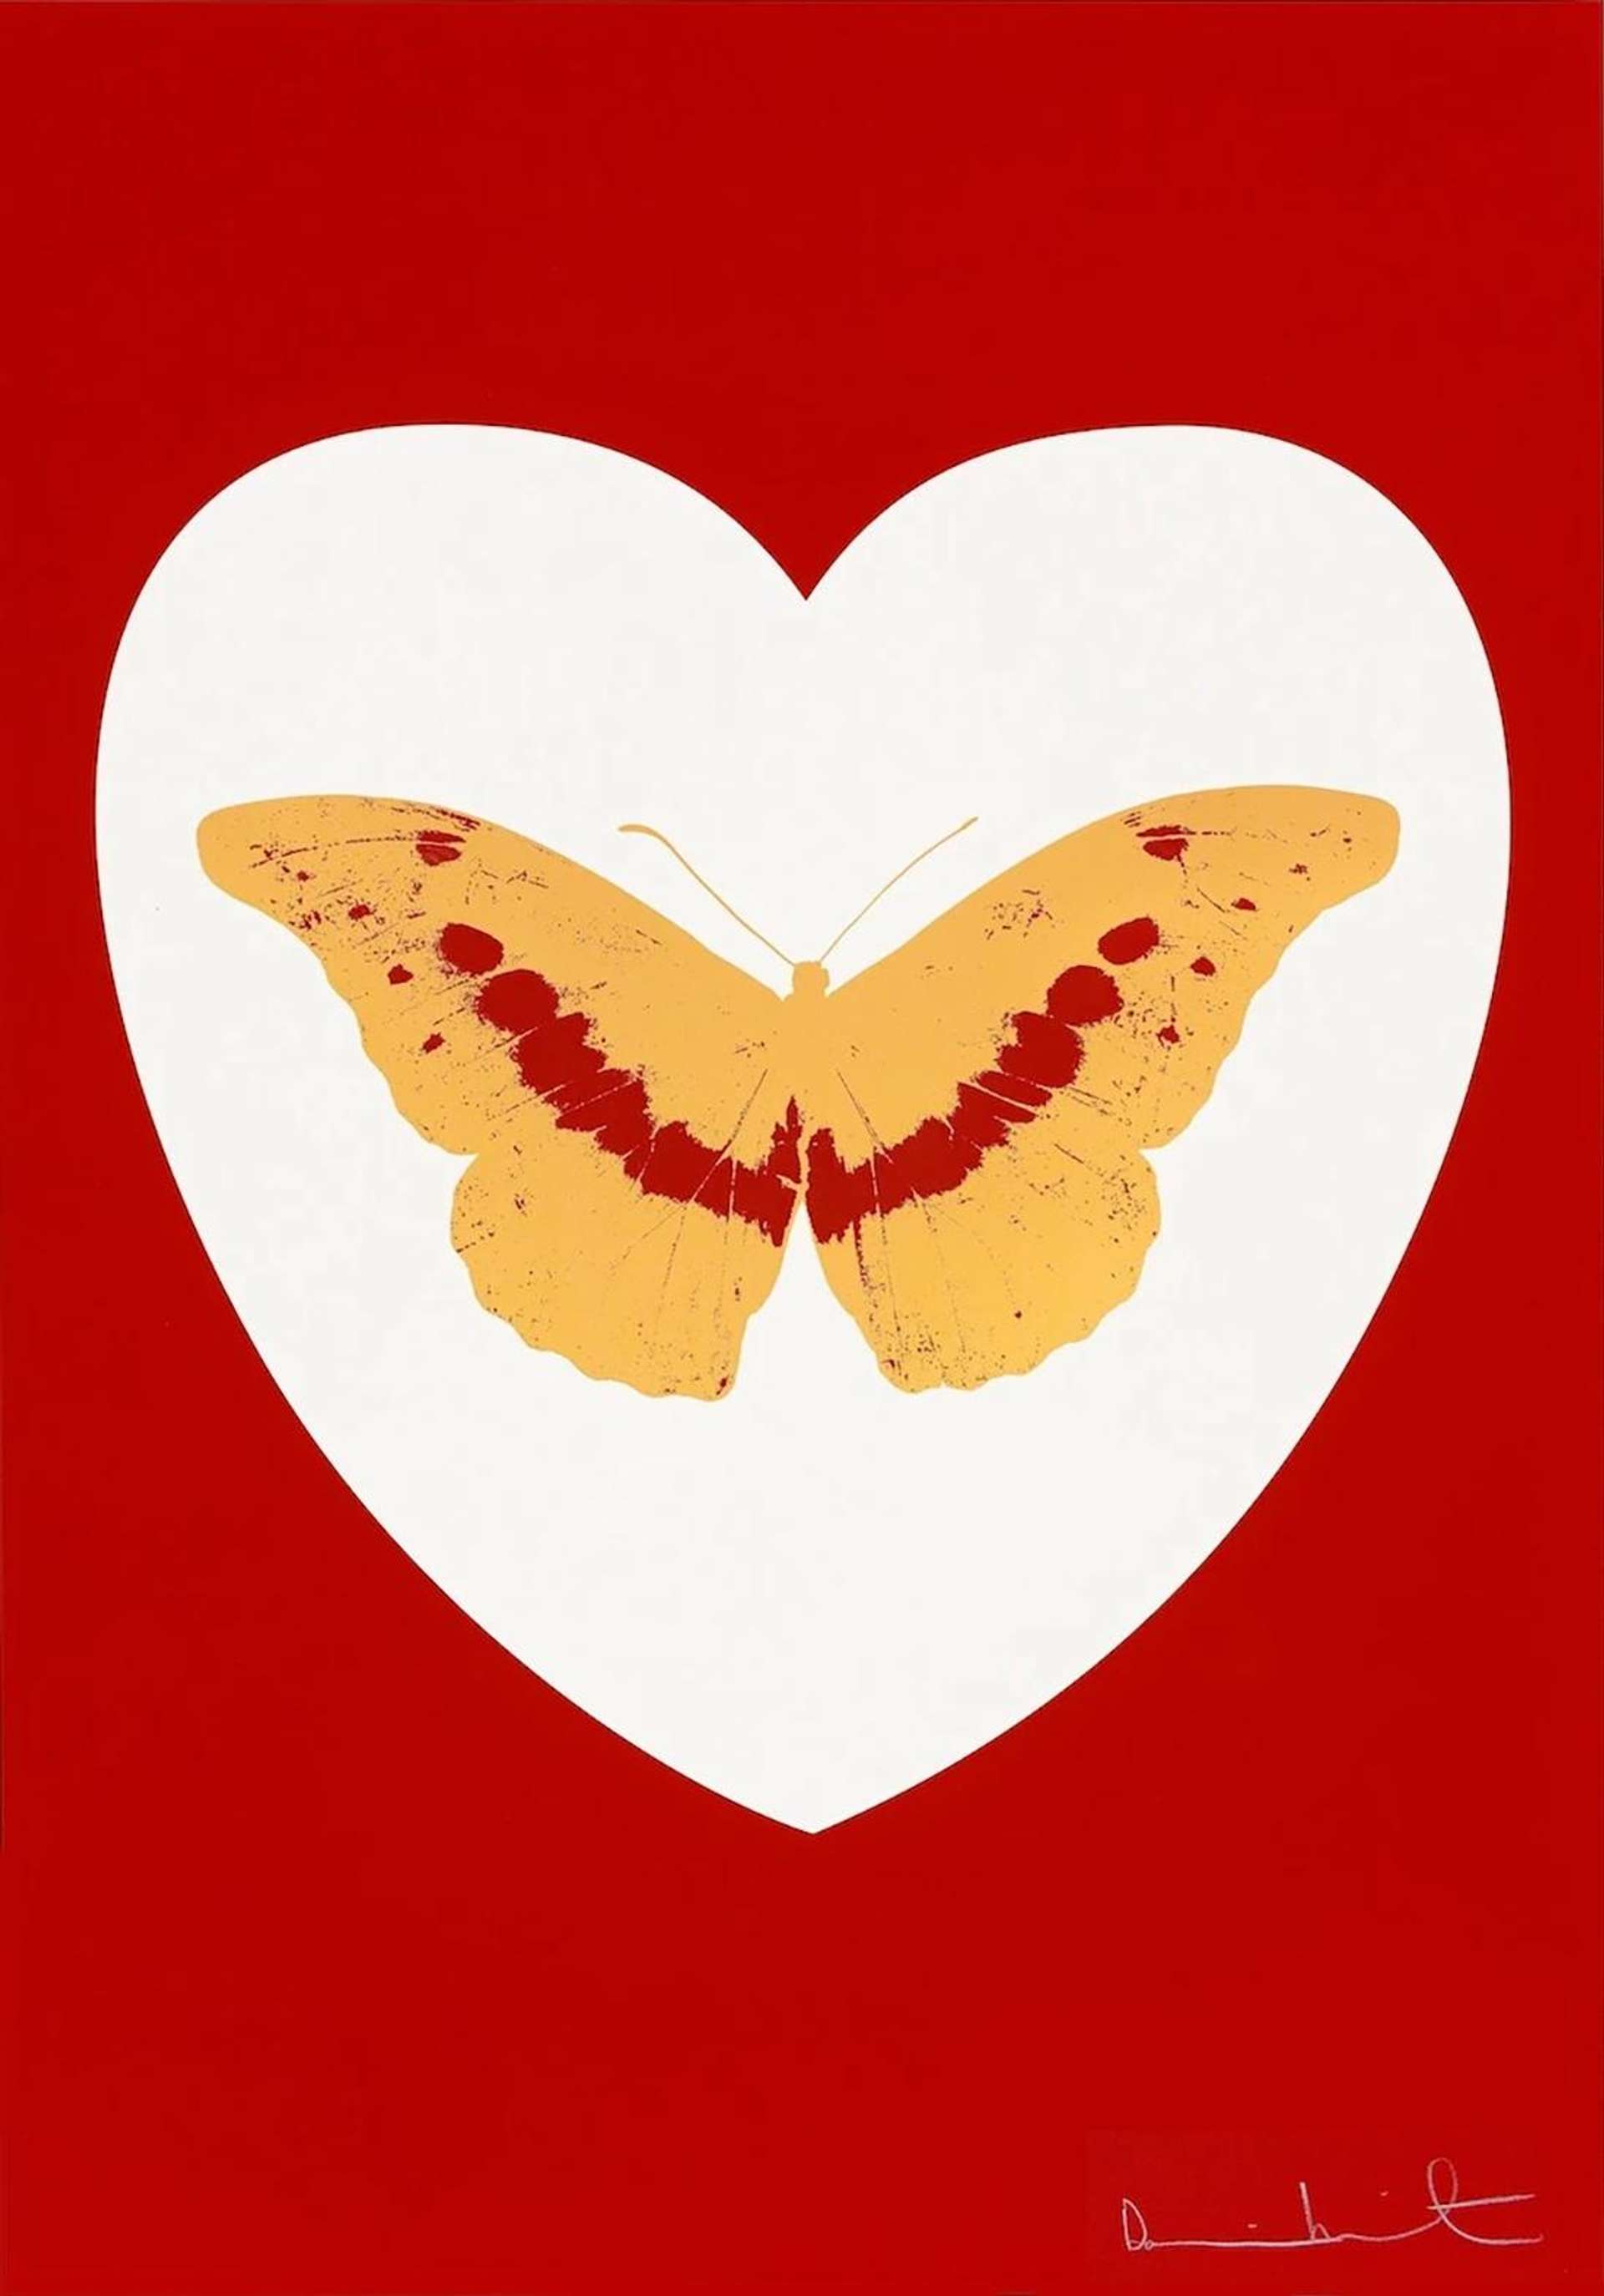 I Love You (white, red, cool gold, poppy red) - Signed Print by Damien Hirst 2015 - MyArtBroker